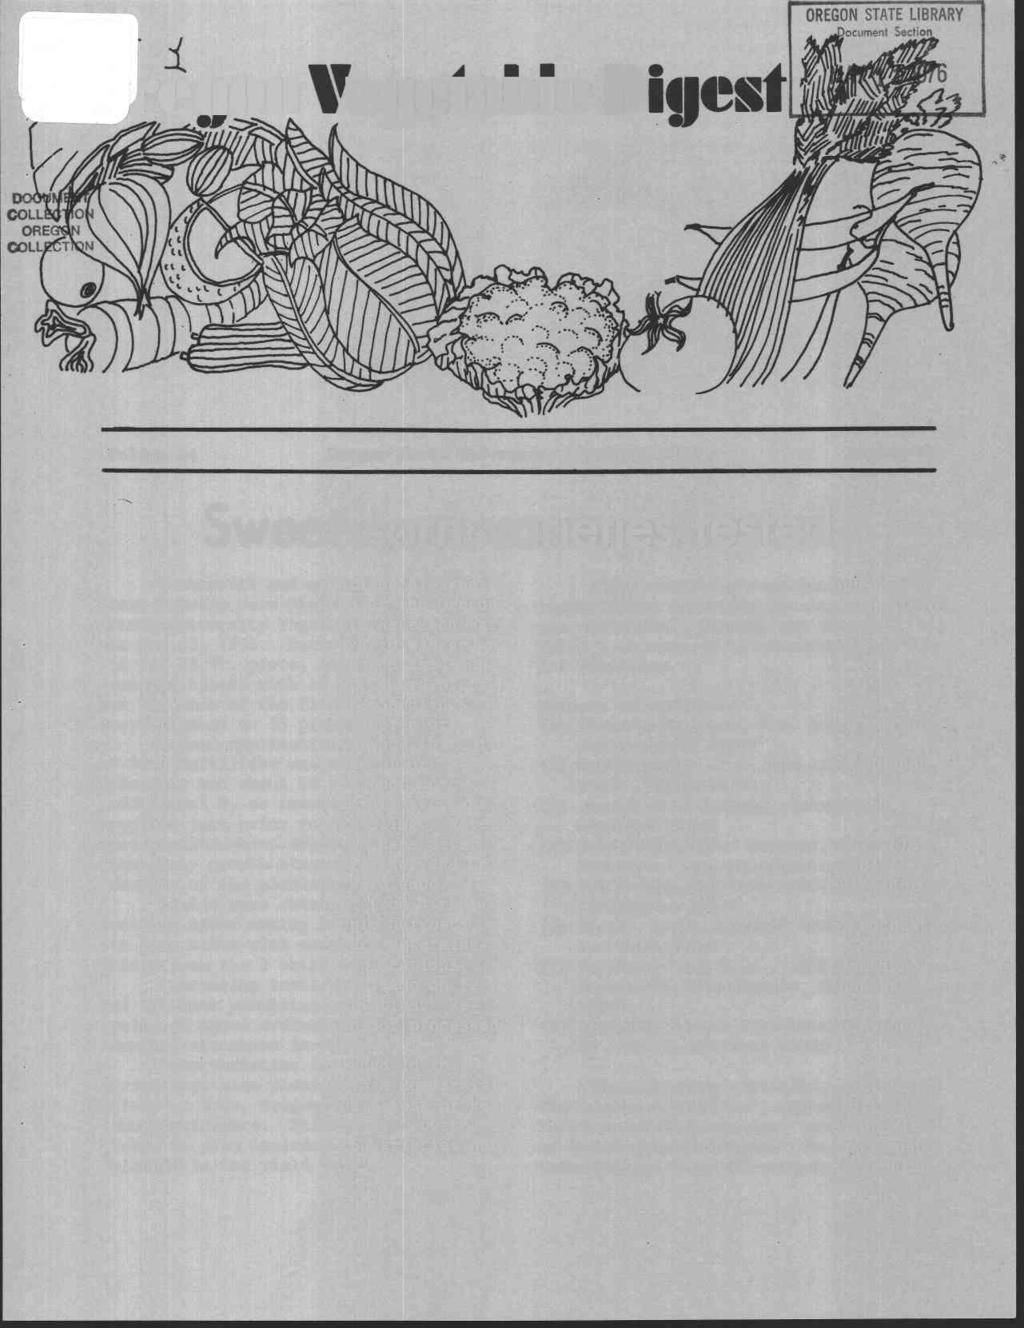 OREGON STATE LIBRARY ocliment Section rciion egelaihe D Volume 24 Oregon State University, October 1975 Number 4 Sweet corn varieties tested Commercial and experimental sweet corn hybrids were